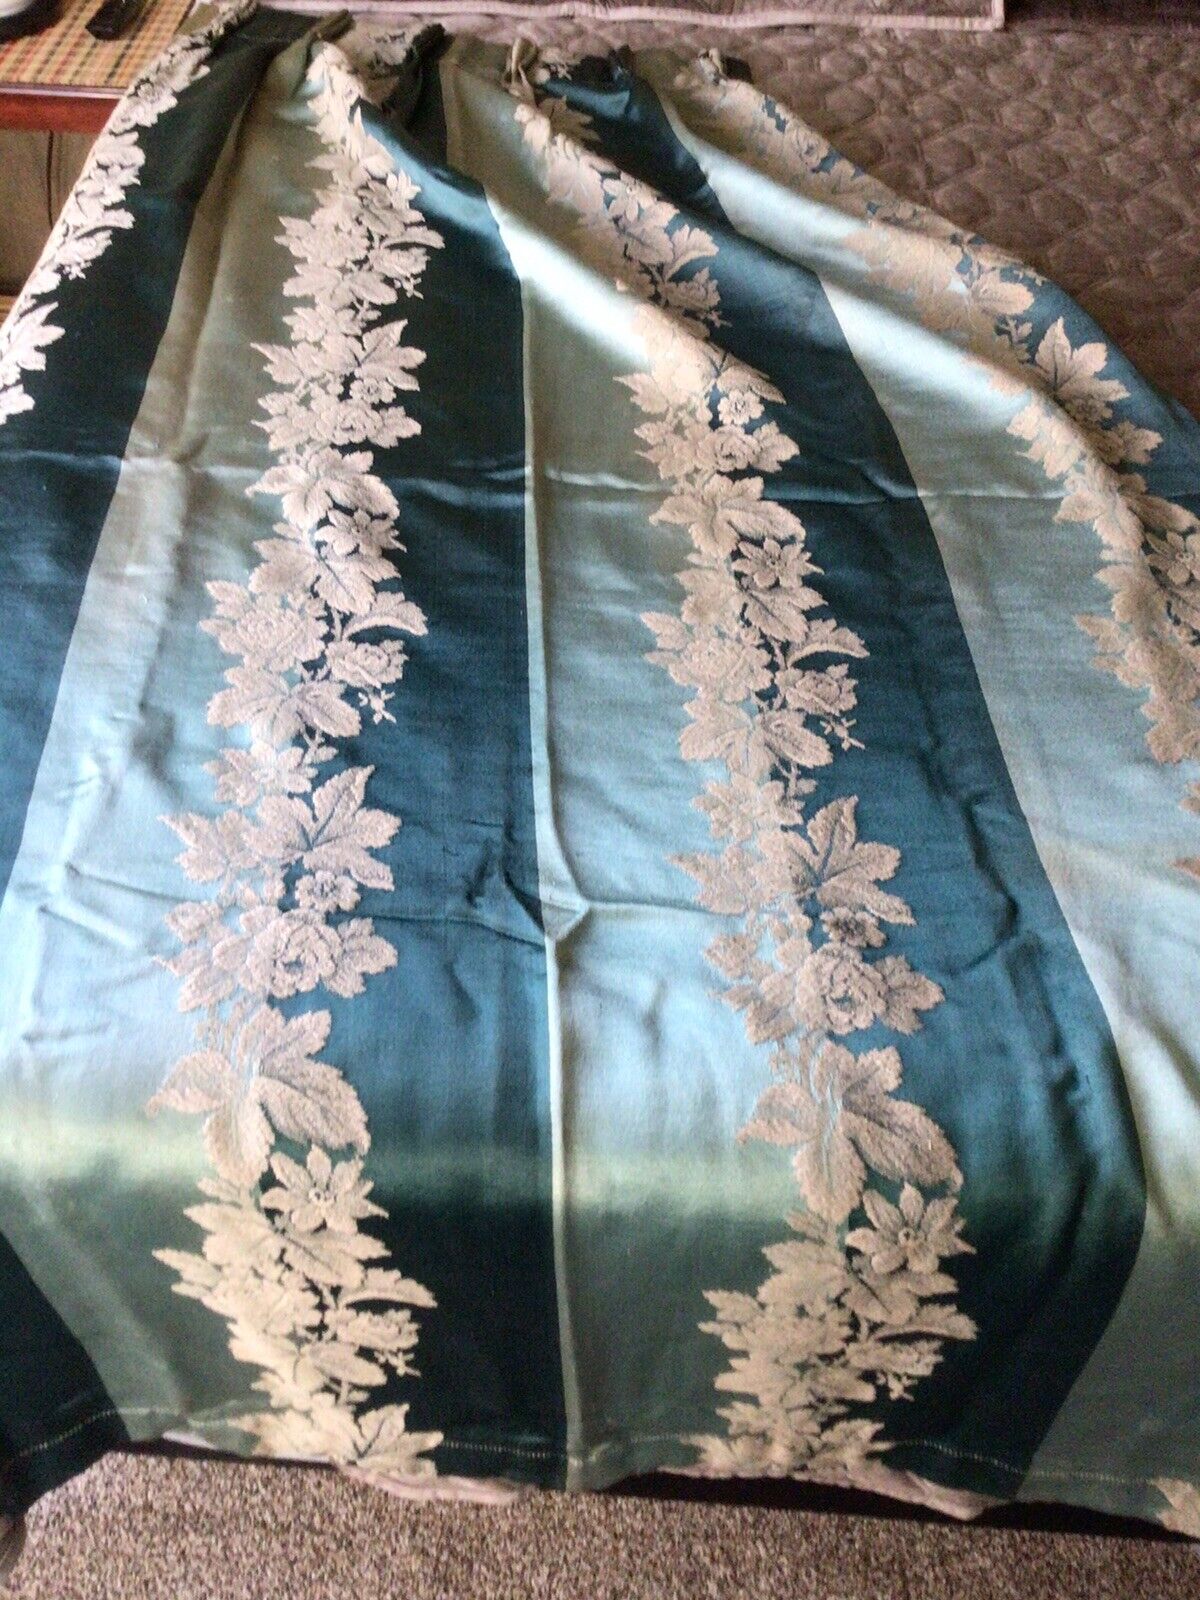 ANTIQUE BROCATELLE DAMASK CURTAIN PANELS NOT REPRO TEAL AND TAUPE BROCADE